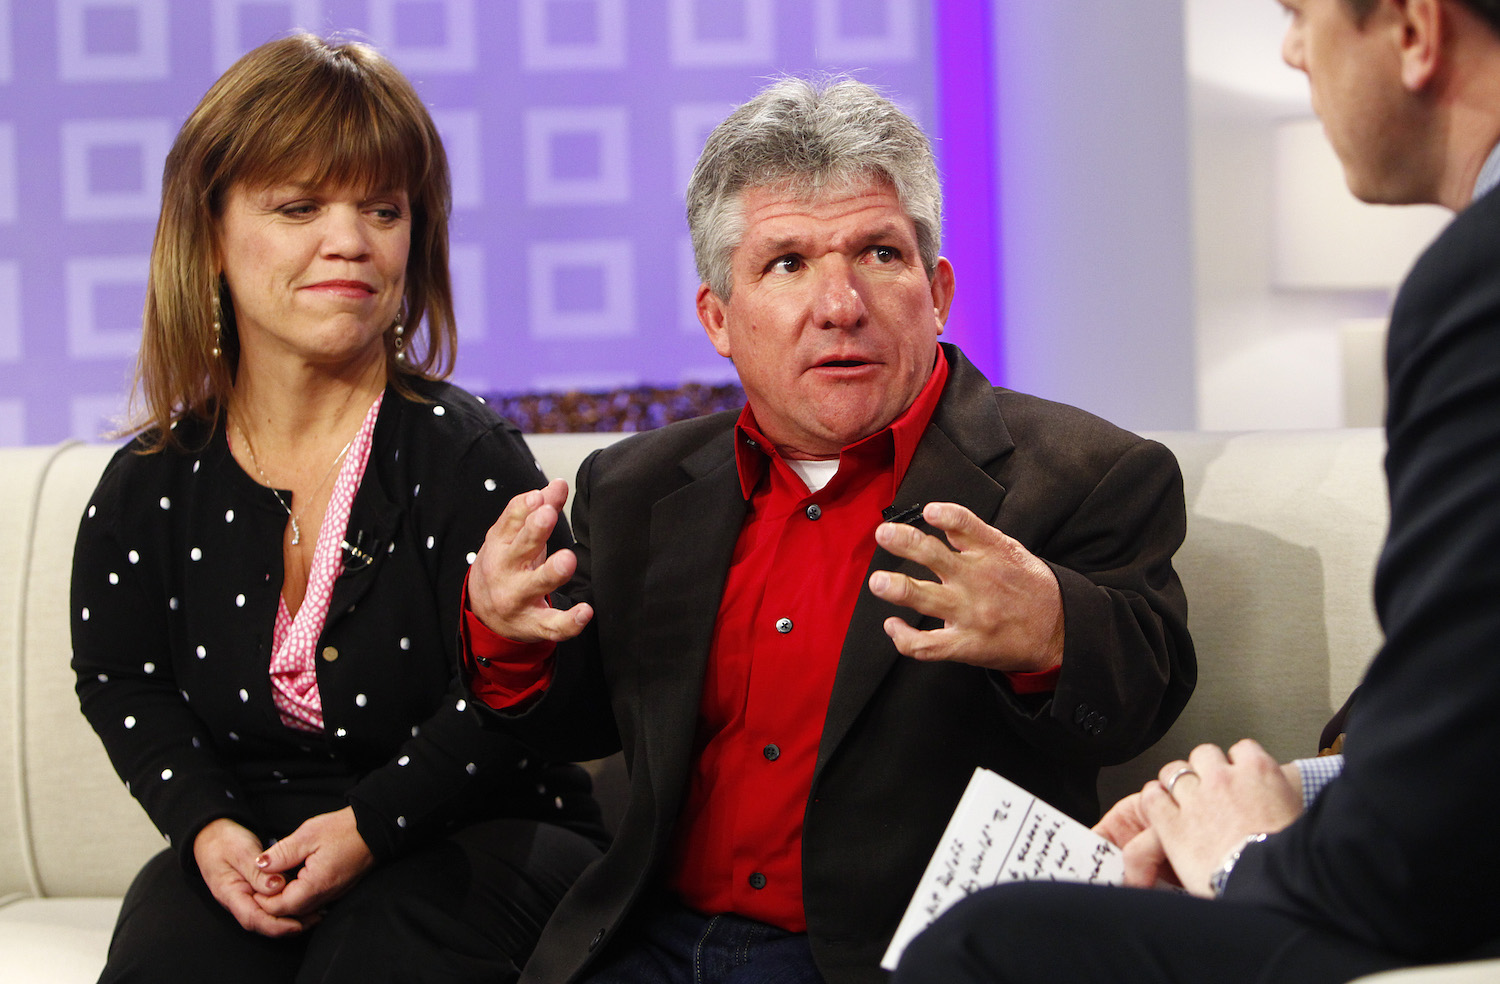 Amy Roloff and Matt Roloff from 'Little People, Big World' speaking to an interviewer